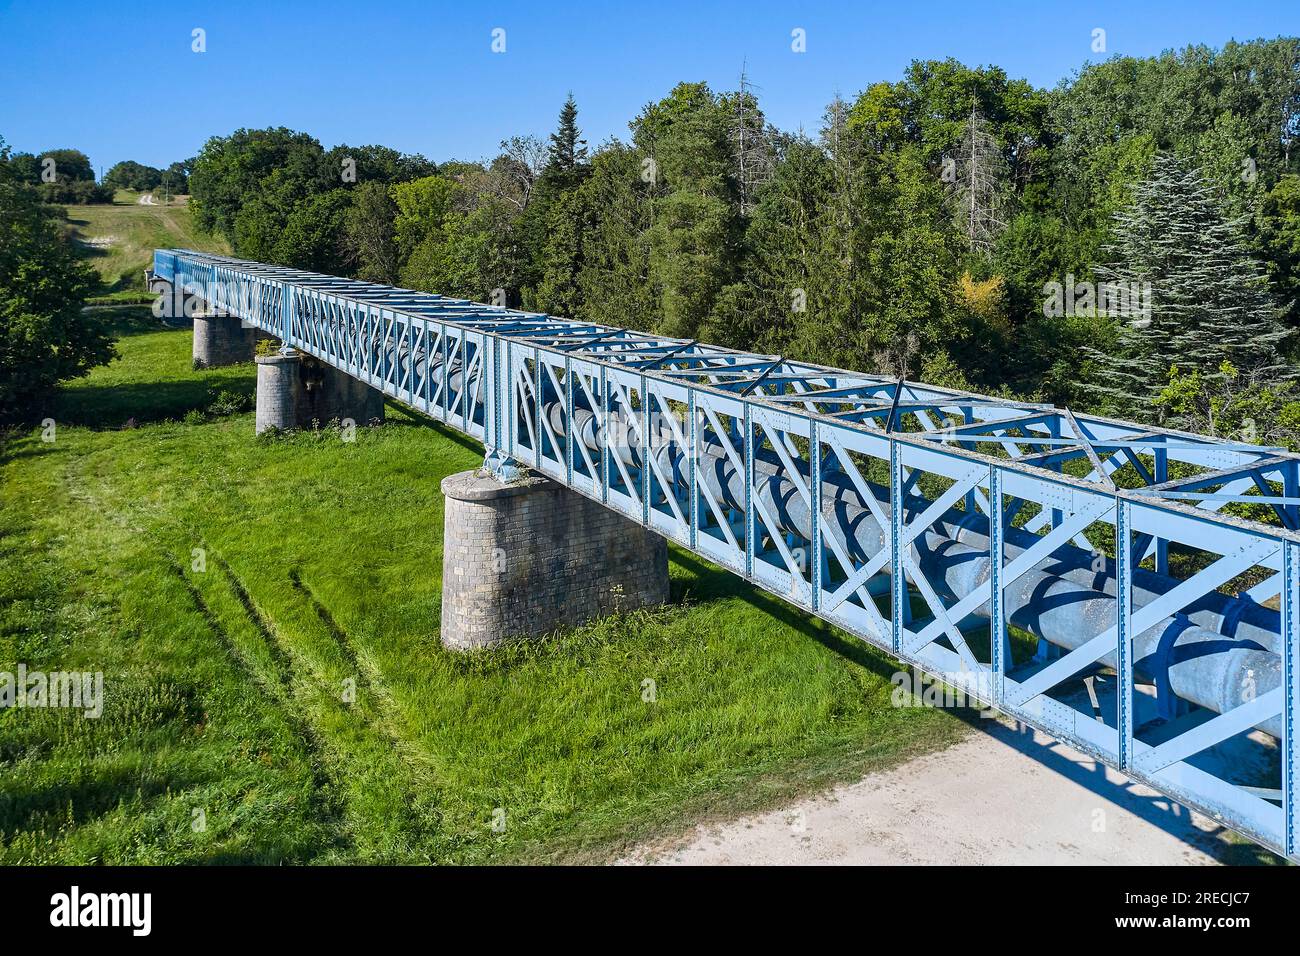 Ouzouer surTrezee (noth central France): feeder channel of the Canal de Briare. The feeder channel of the Canal de Briare runs from the water elevator Stock Photo